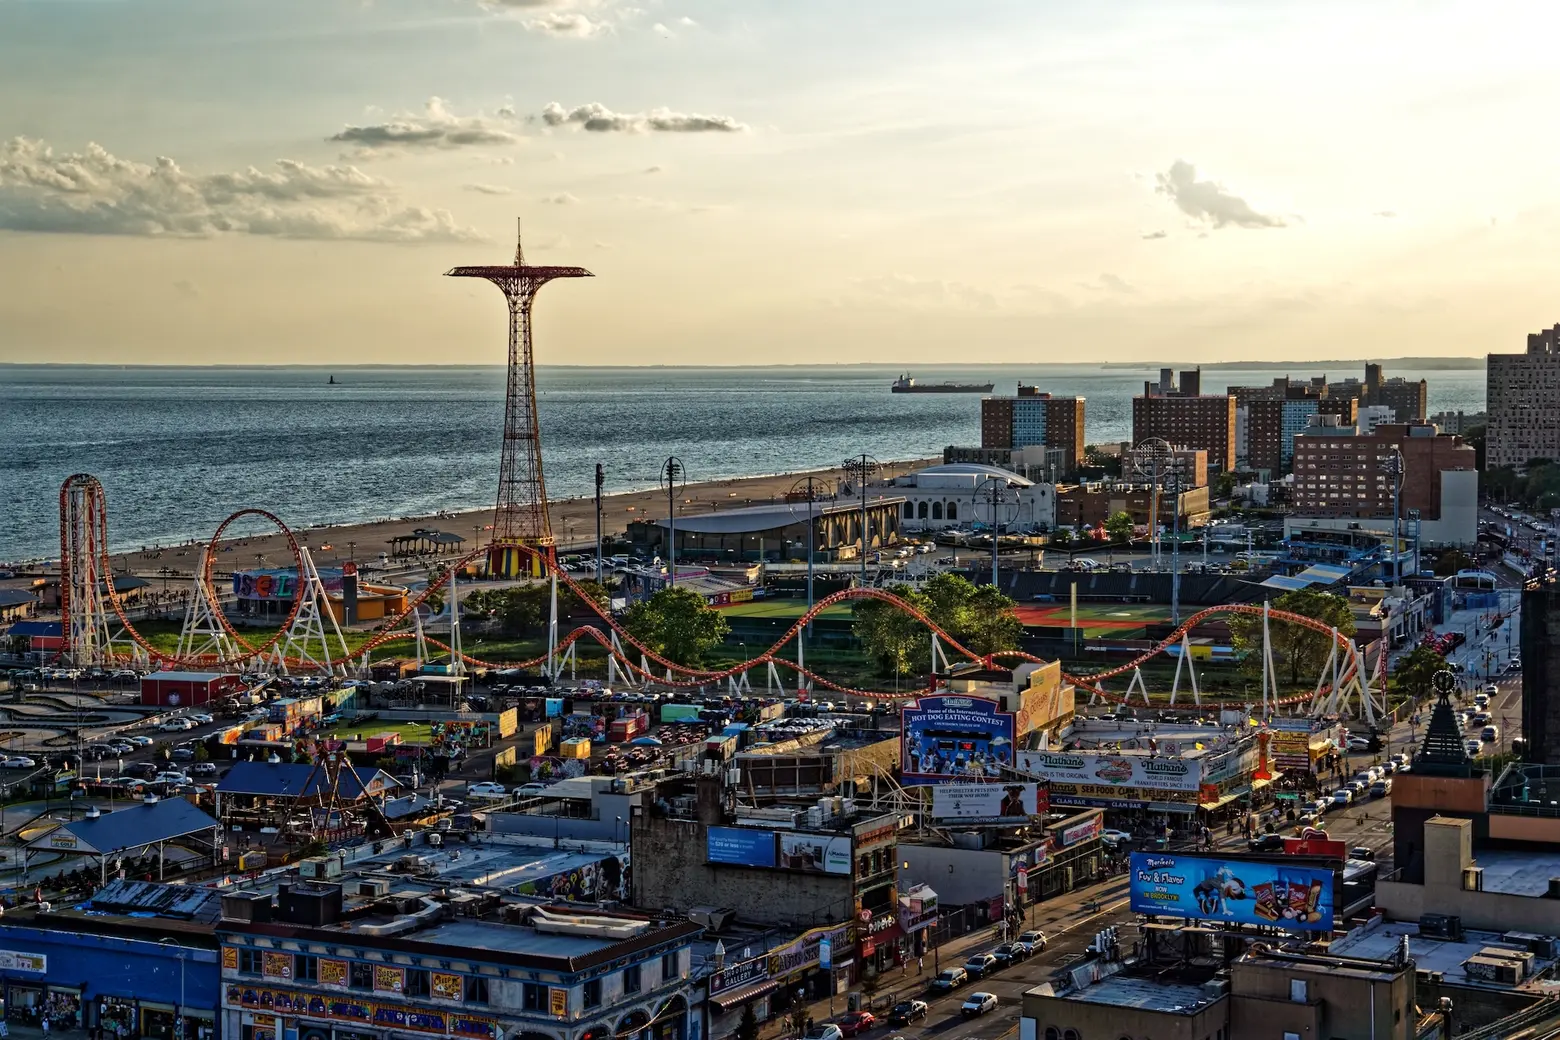 Coney Island opens for the season this weekend